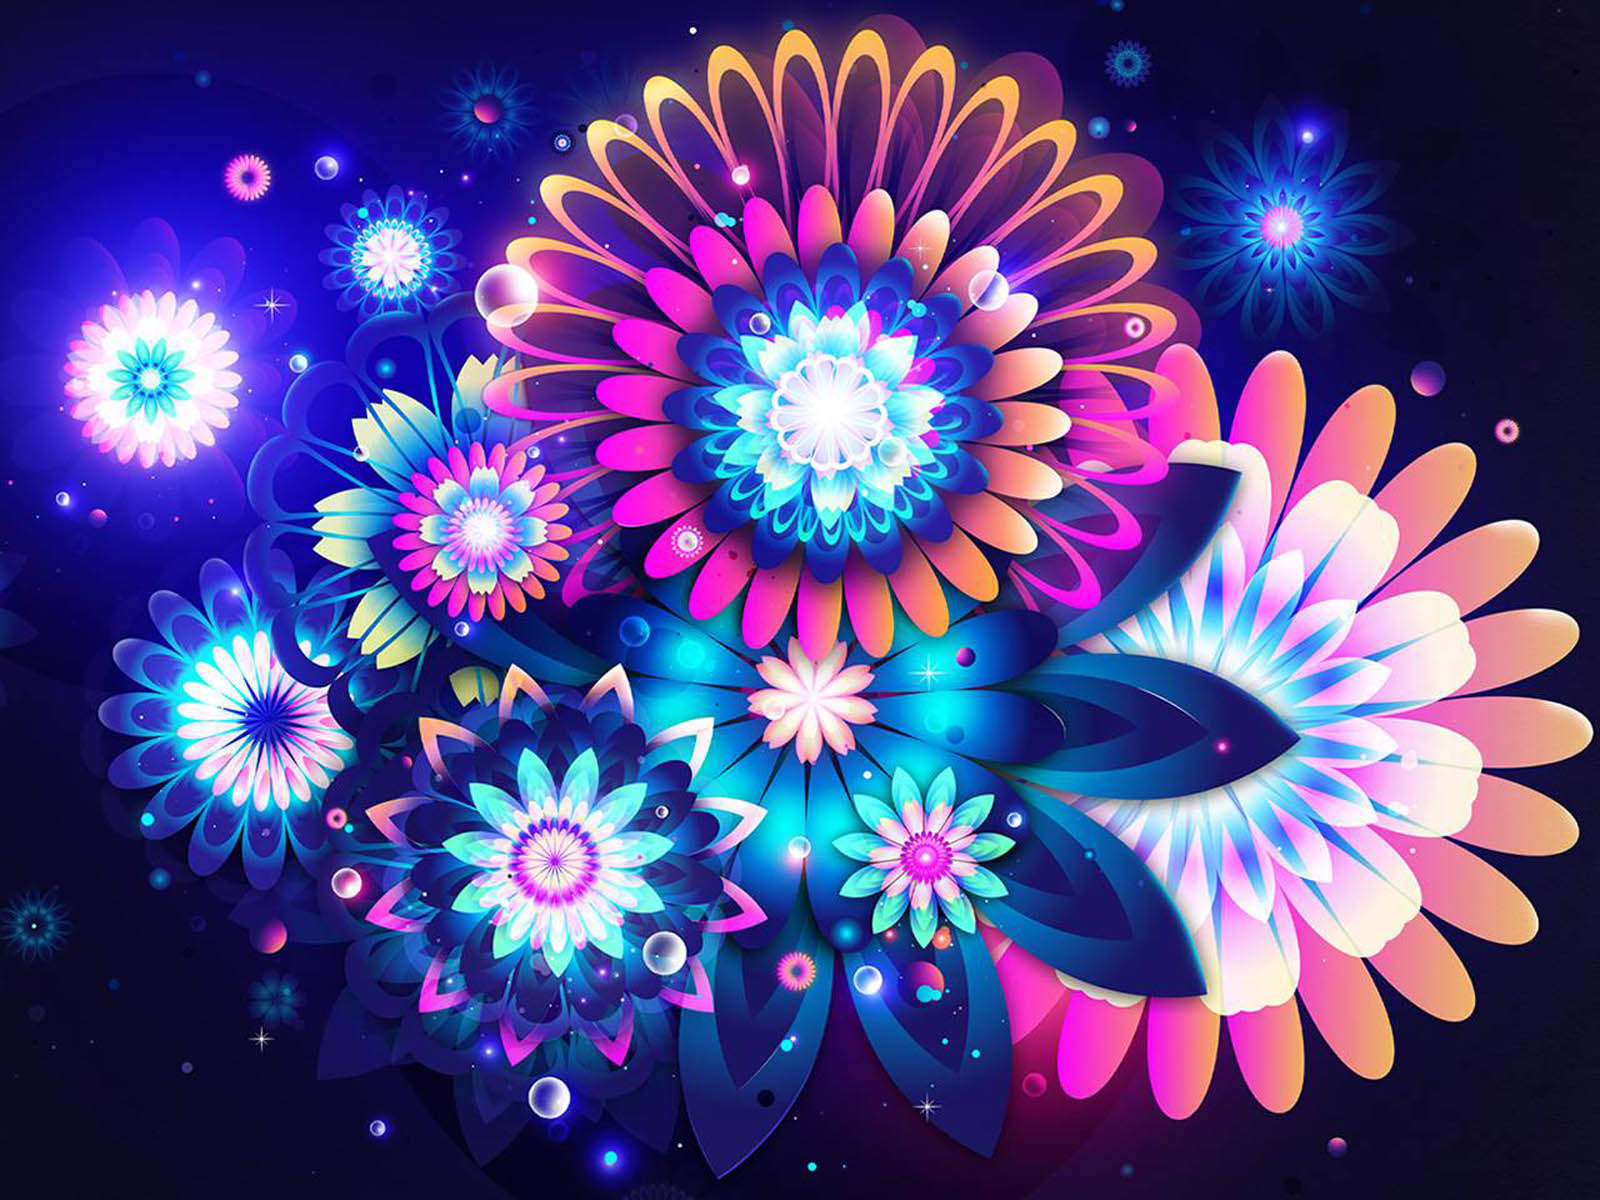 Abstract Flowers Wallpaper On This Graphic Website